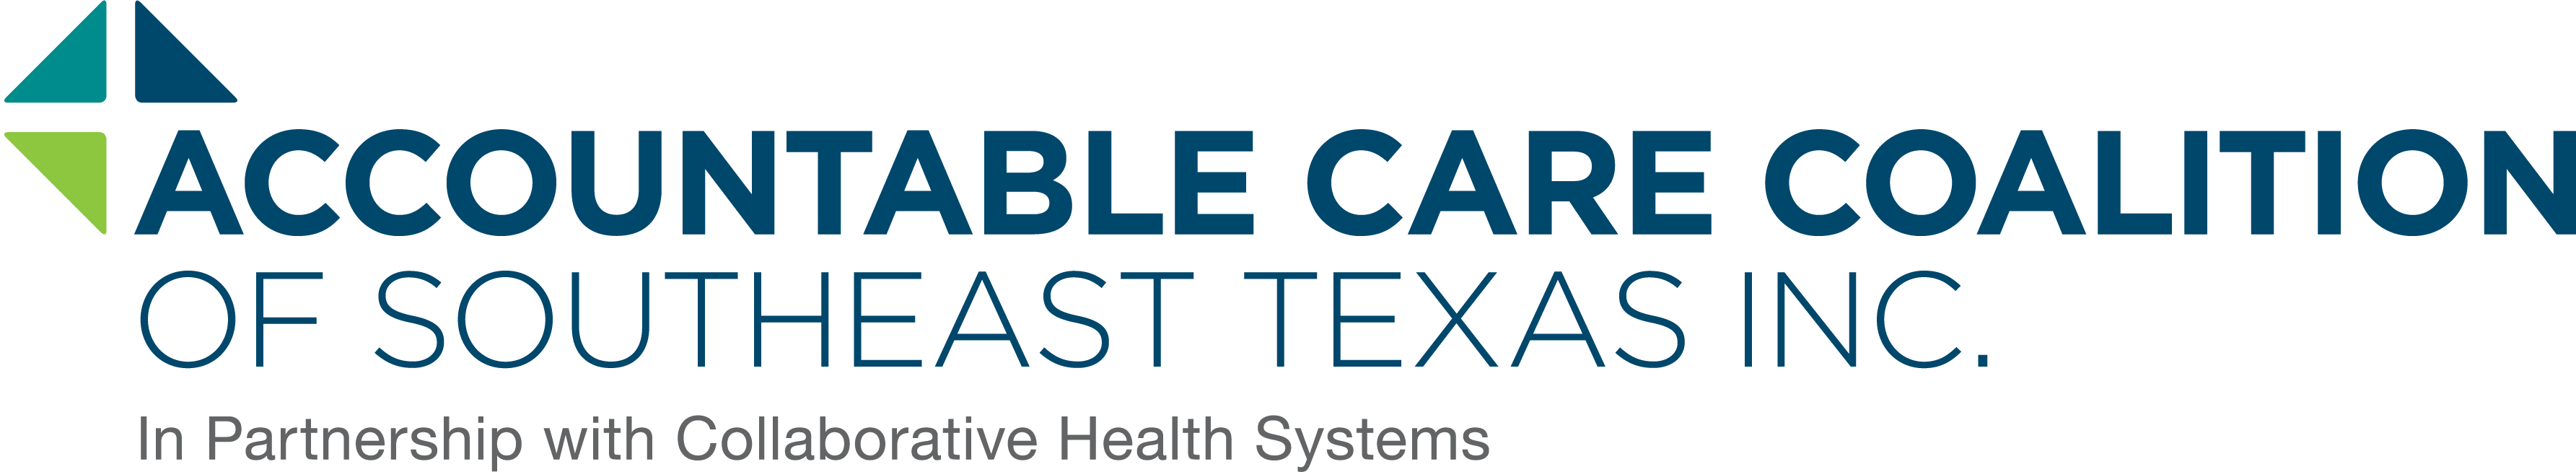 Go to Accountable Care Coalition of Southeast Texas Home Page